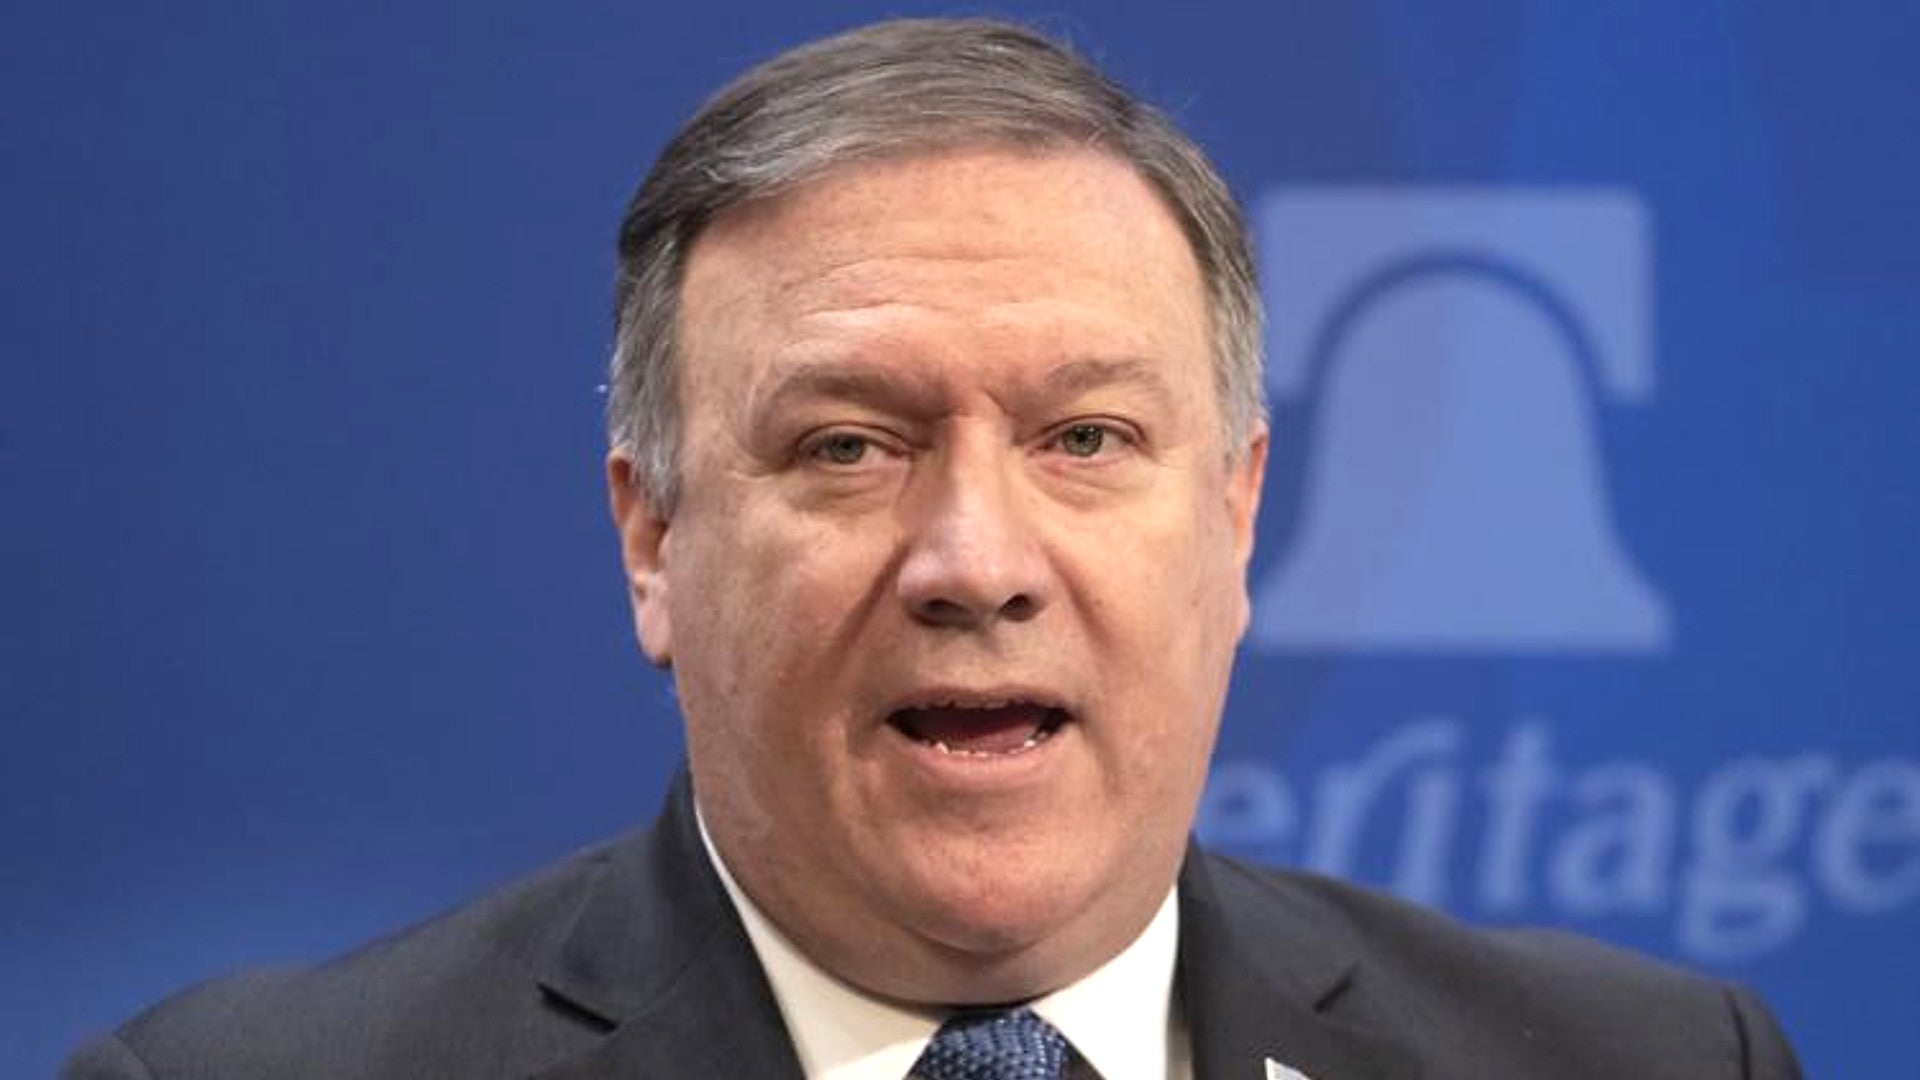 Pompeo’s 12 Demands For Iran Read More Like A Declaration Of War Than A Path To Peace